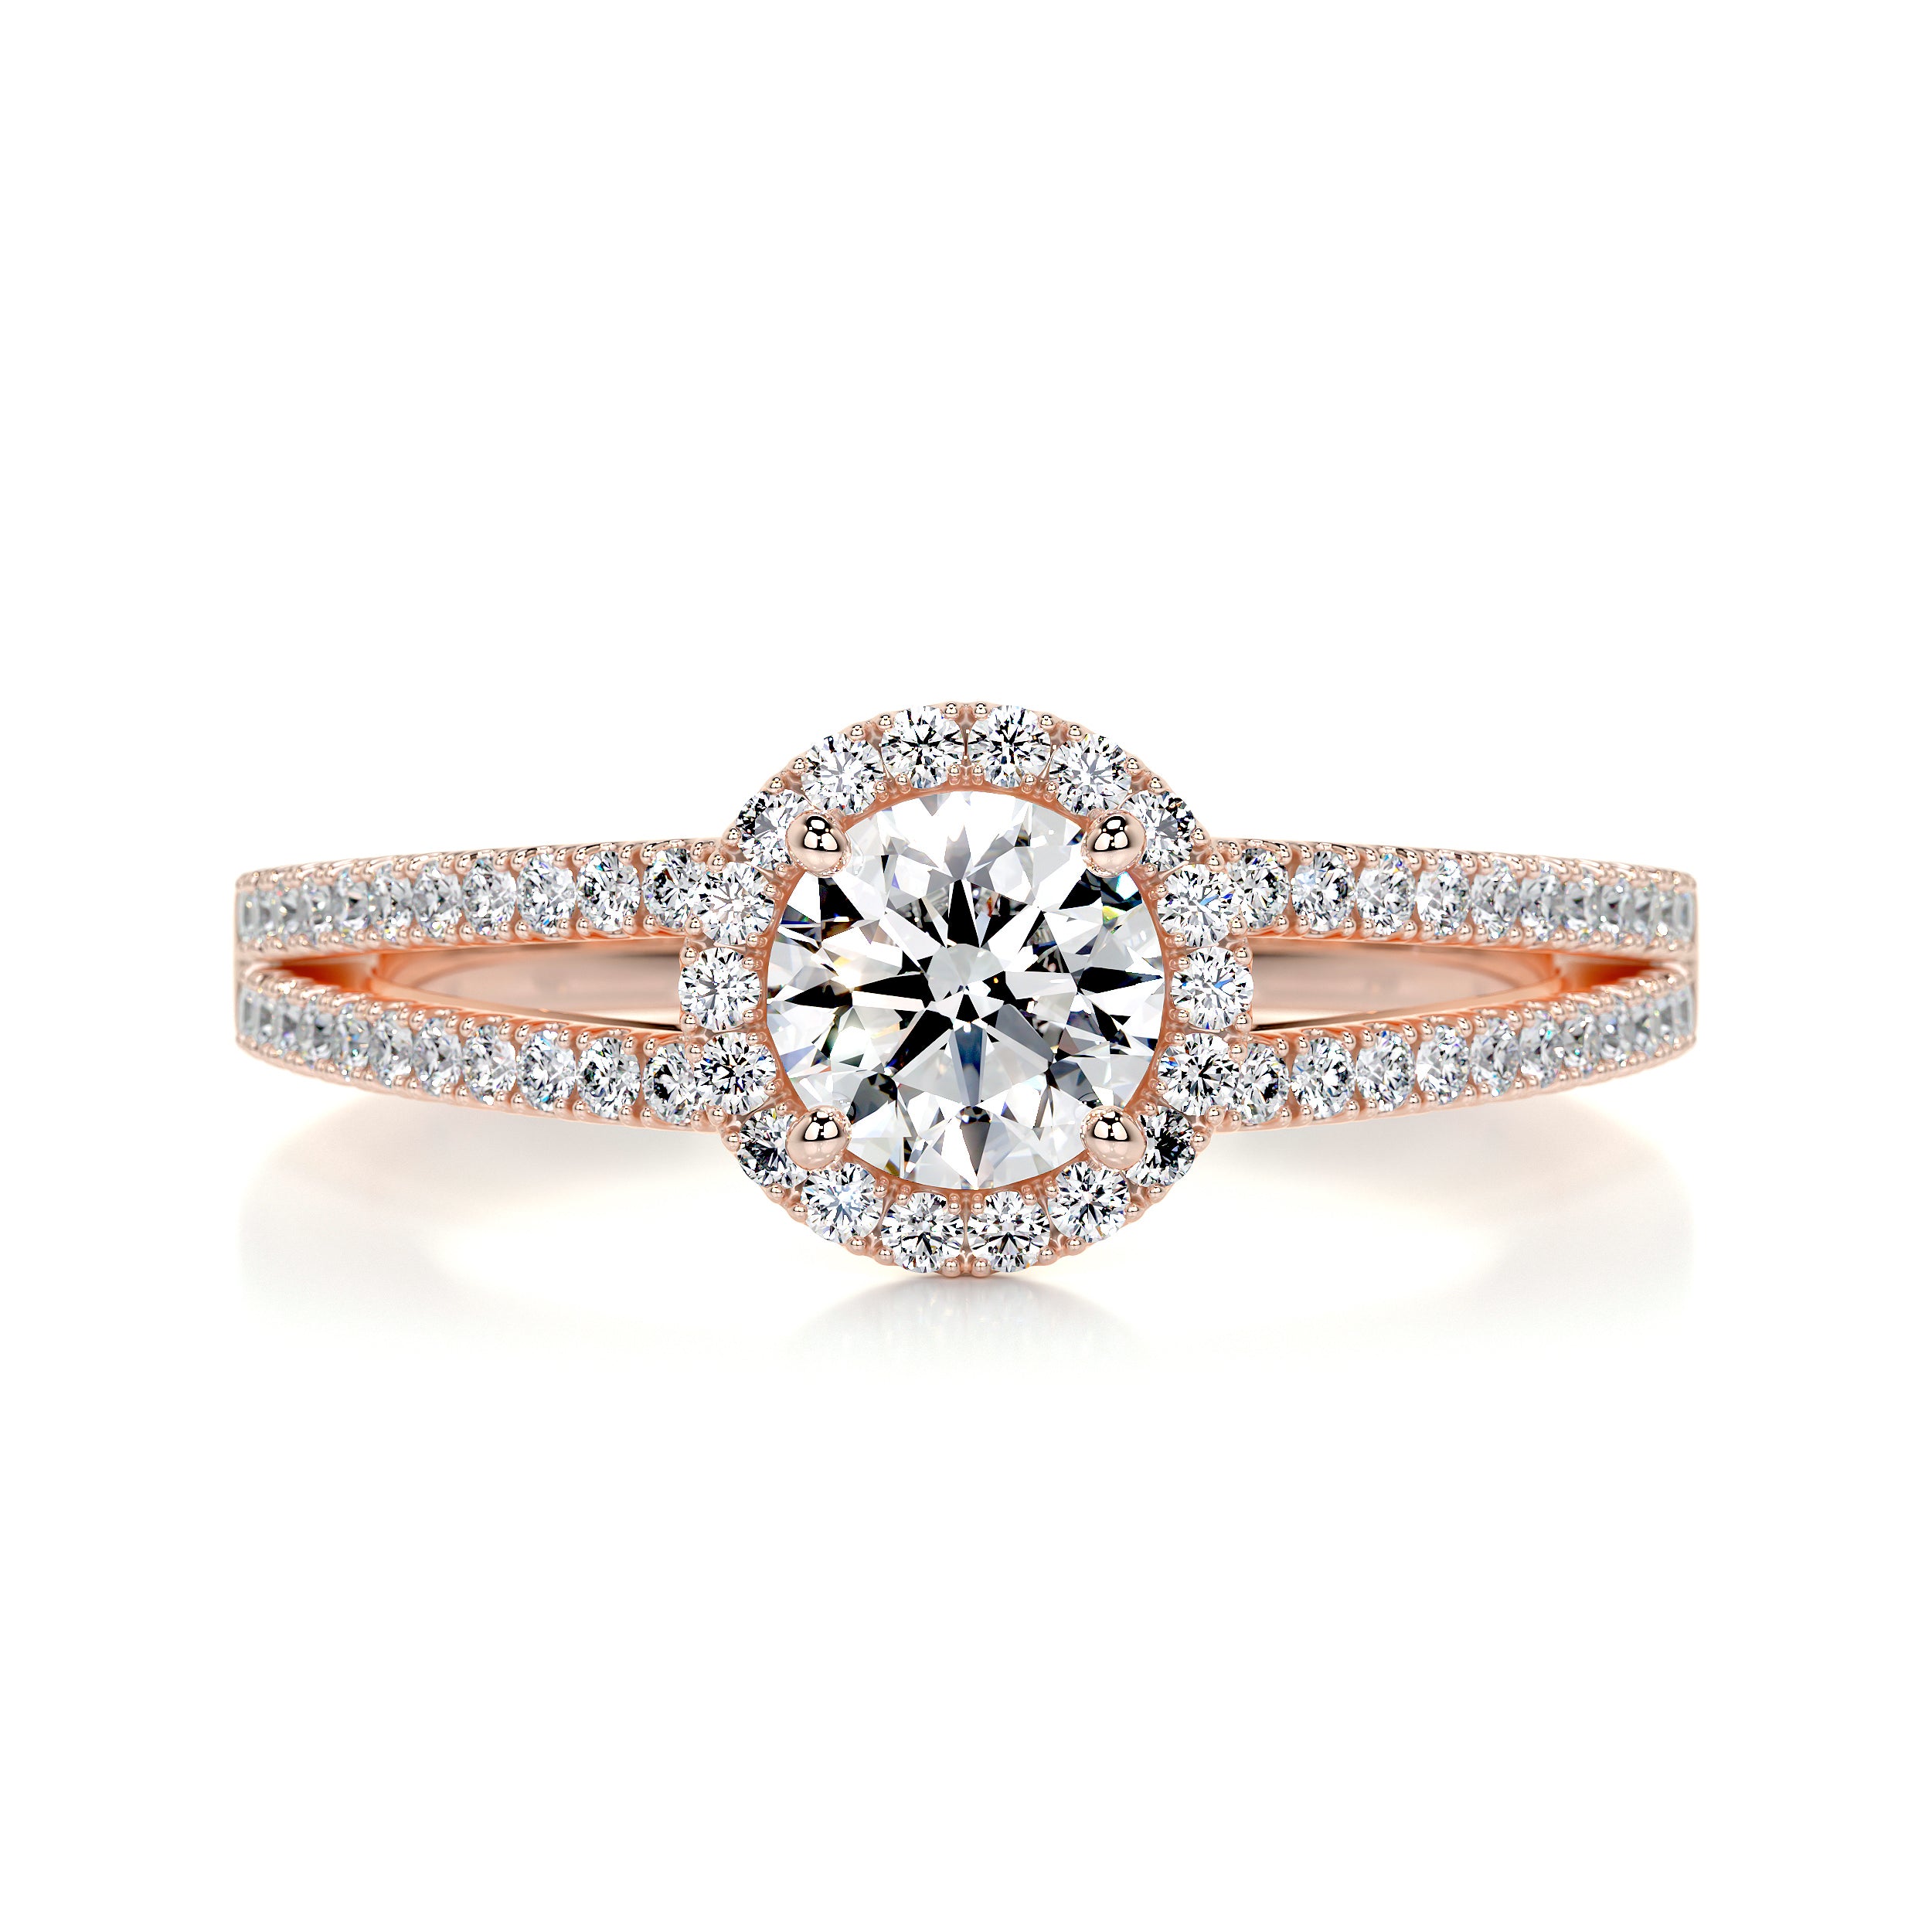 Shop Rose Gold Engagement Rings | Rose Gold Rings - Friendly Diamonds